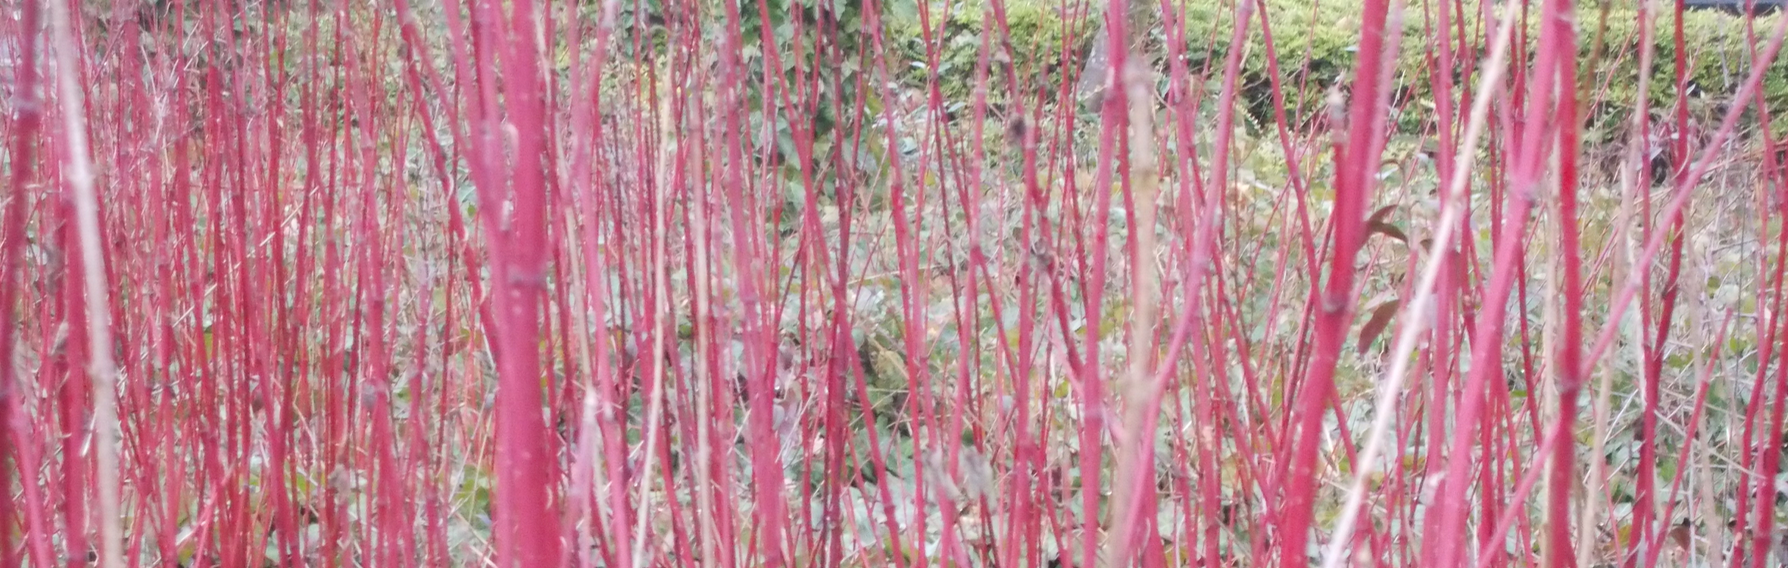 Red Stems in Winter